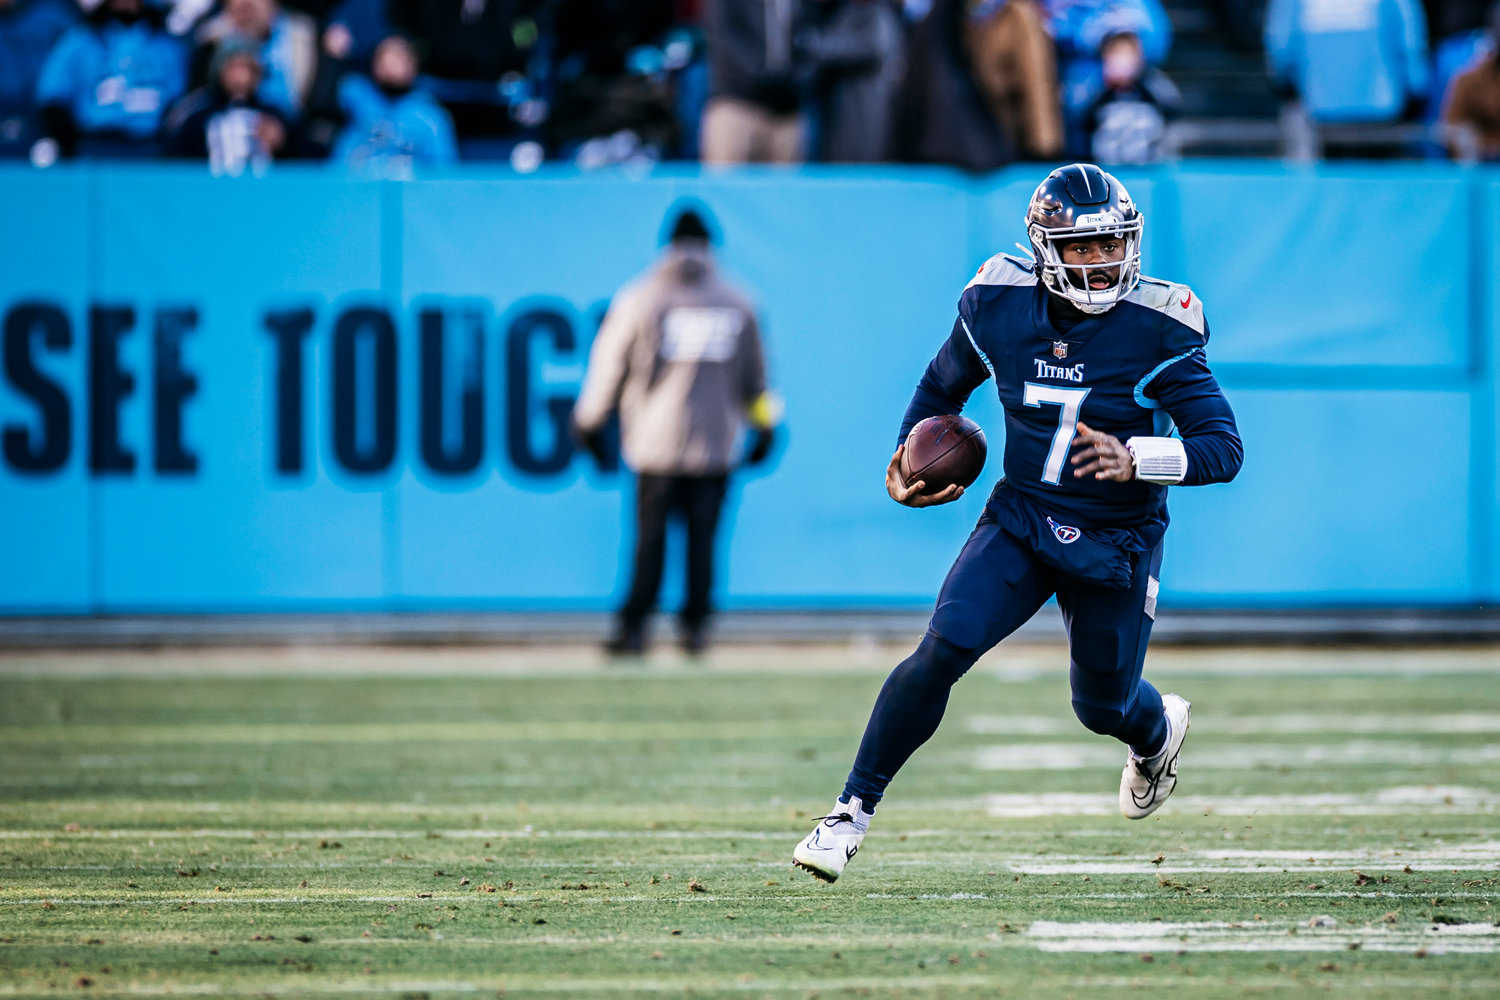 Malik Willis went 14-of-23 for 99 yards and two interceptions as the Titans’ starting quarterback on Saturday.